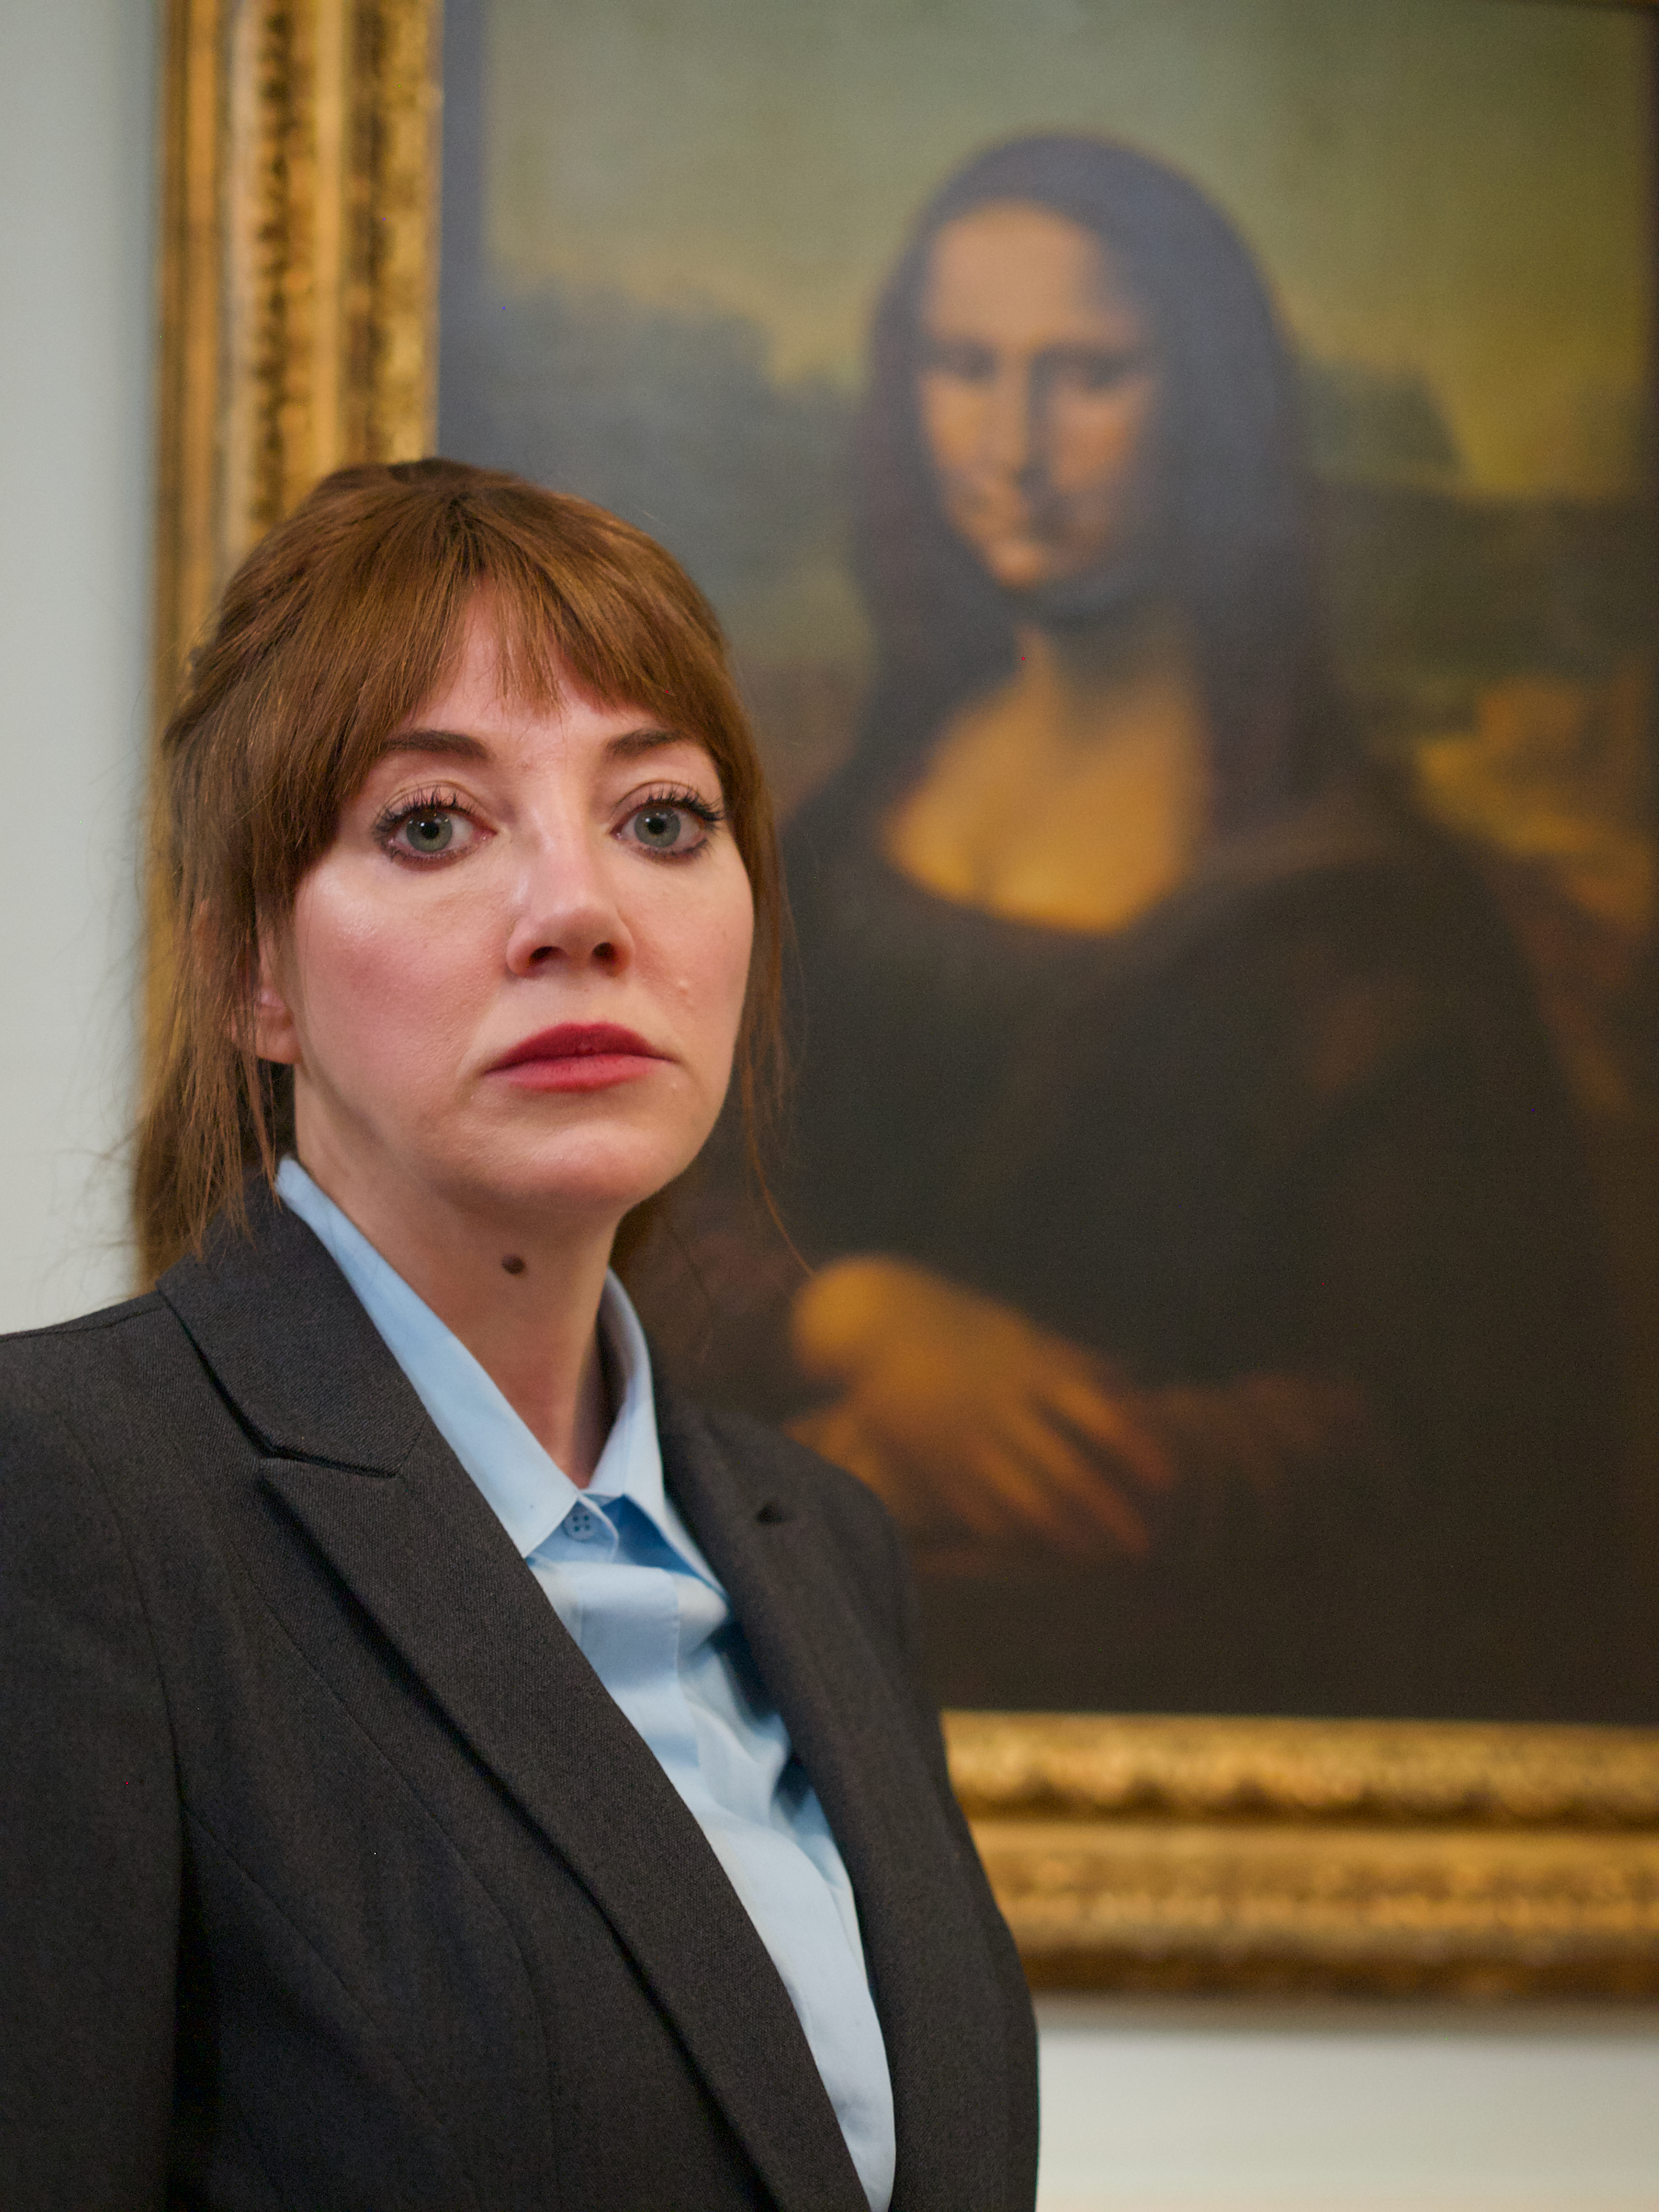 Diane Morgan as Philomena Cunk with 'Mona Lisa' in 'Cunk on Earth'. Image: Courtesy of Netflix